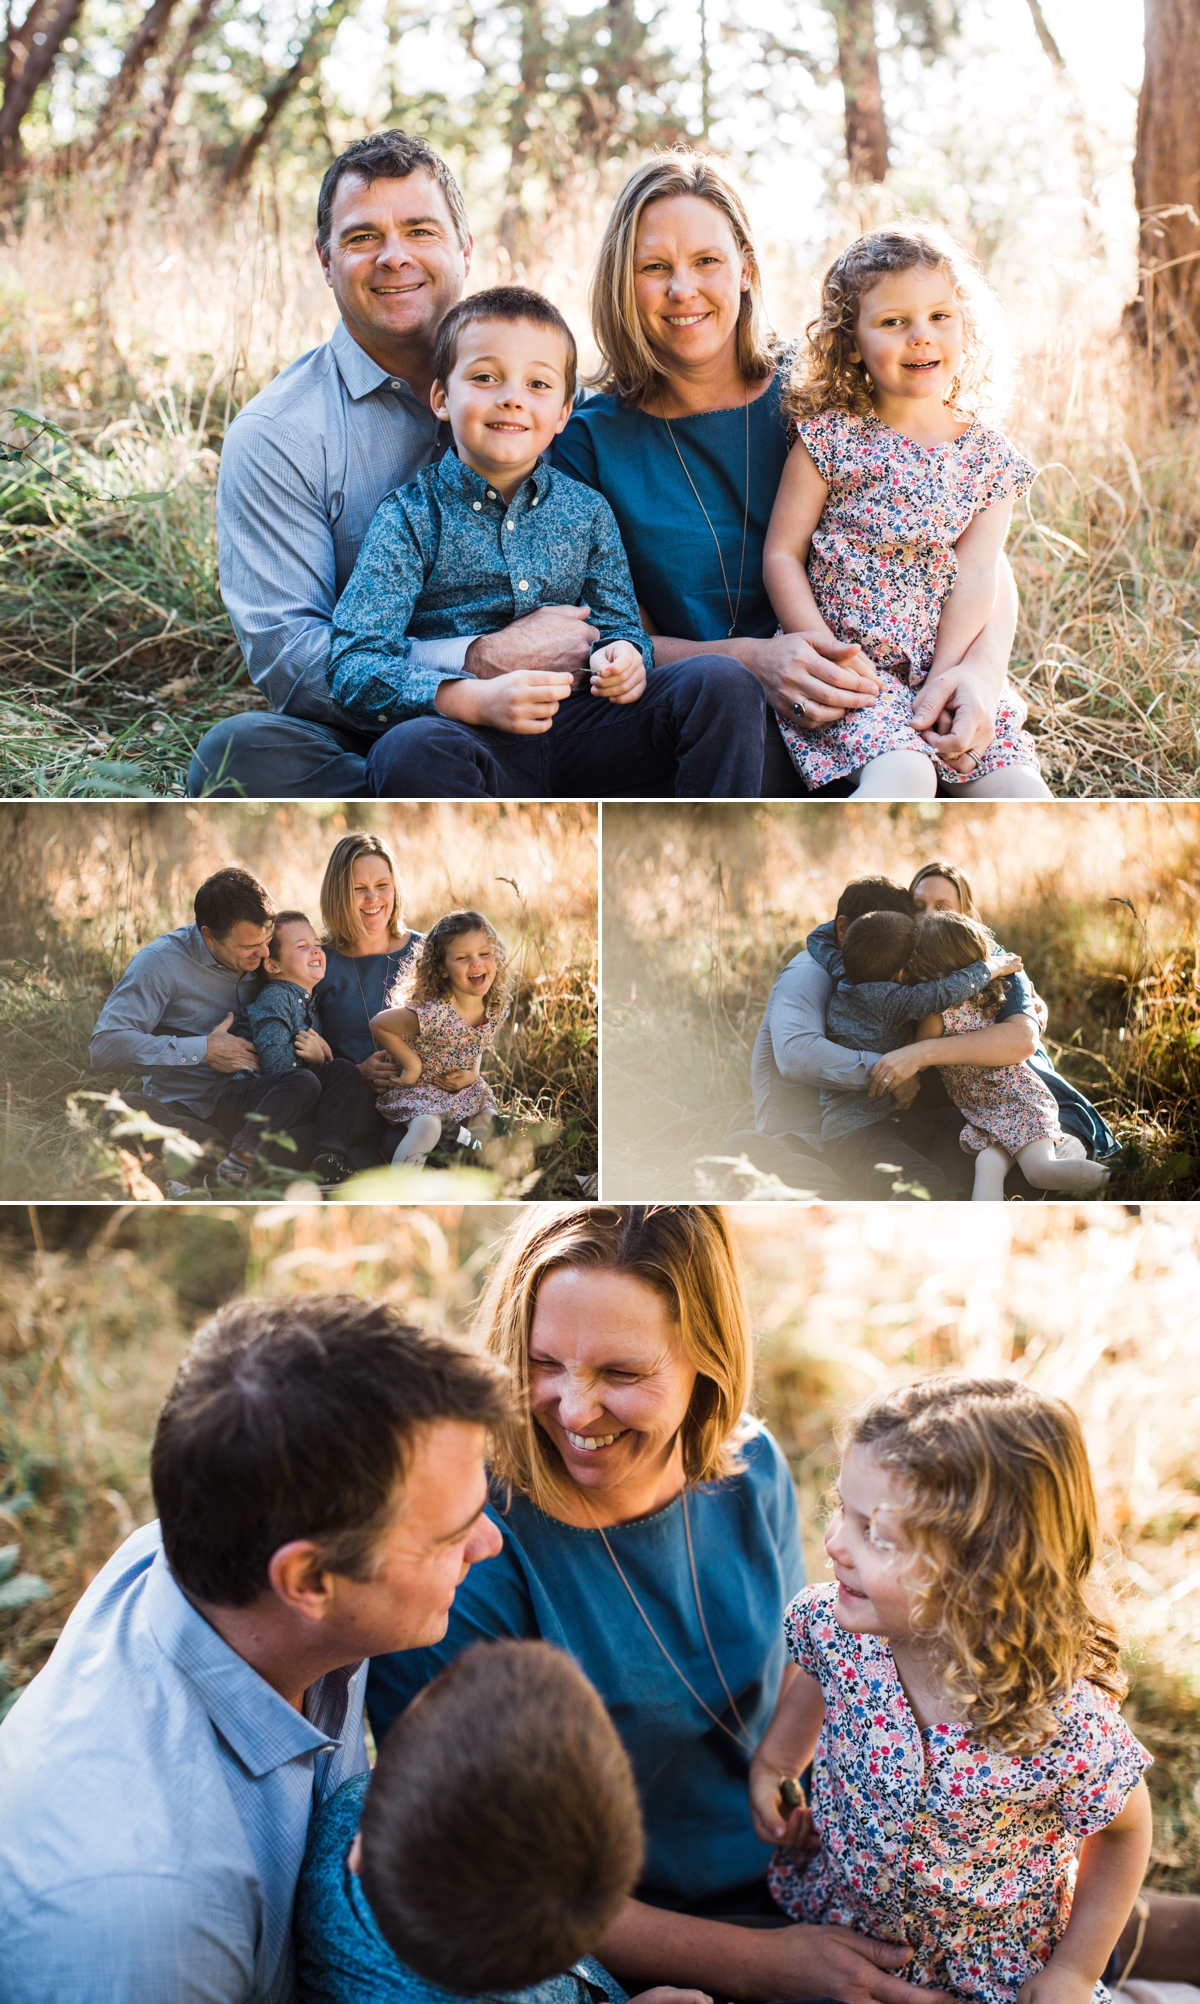 Elena S Blair Photography | Seattle family outdoors | Connected and emotive family photography